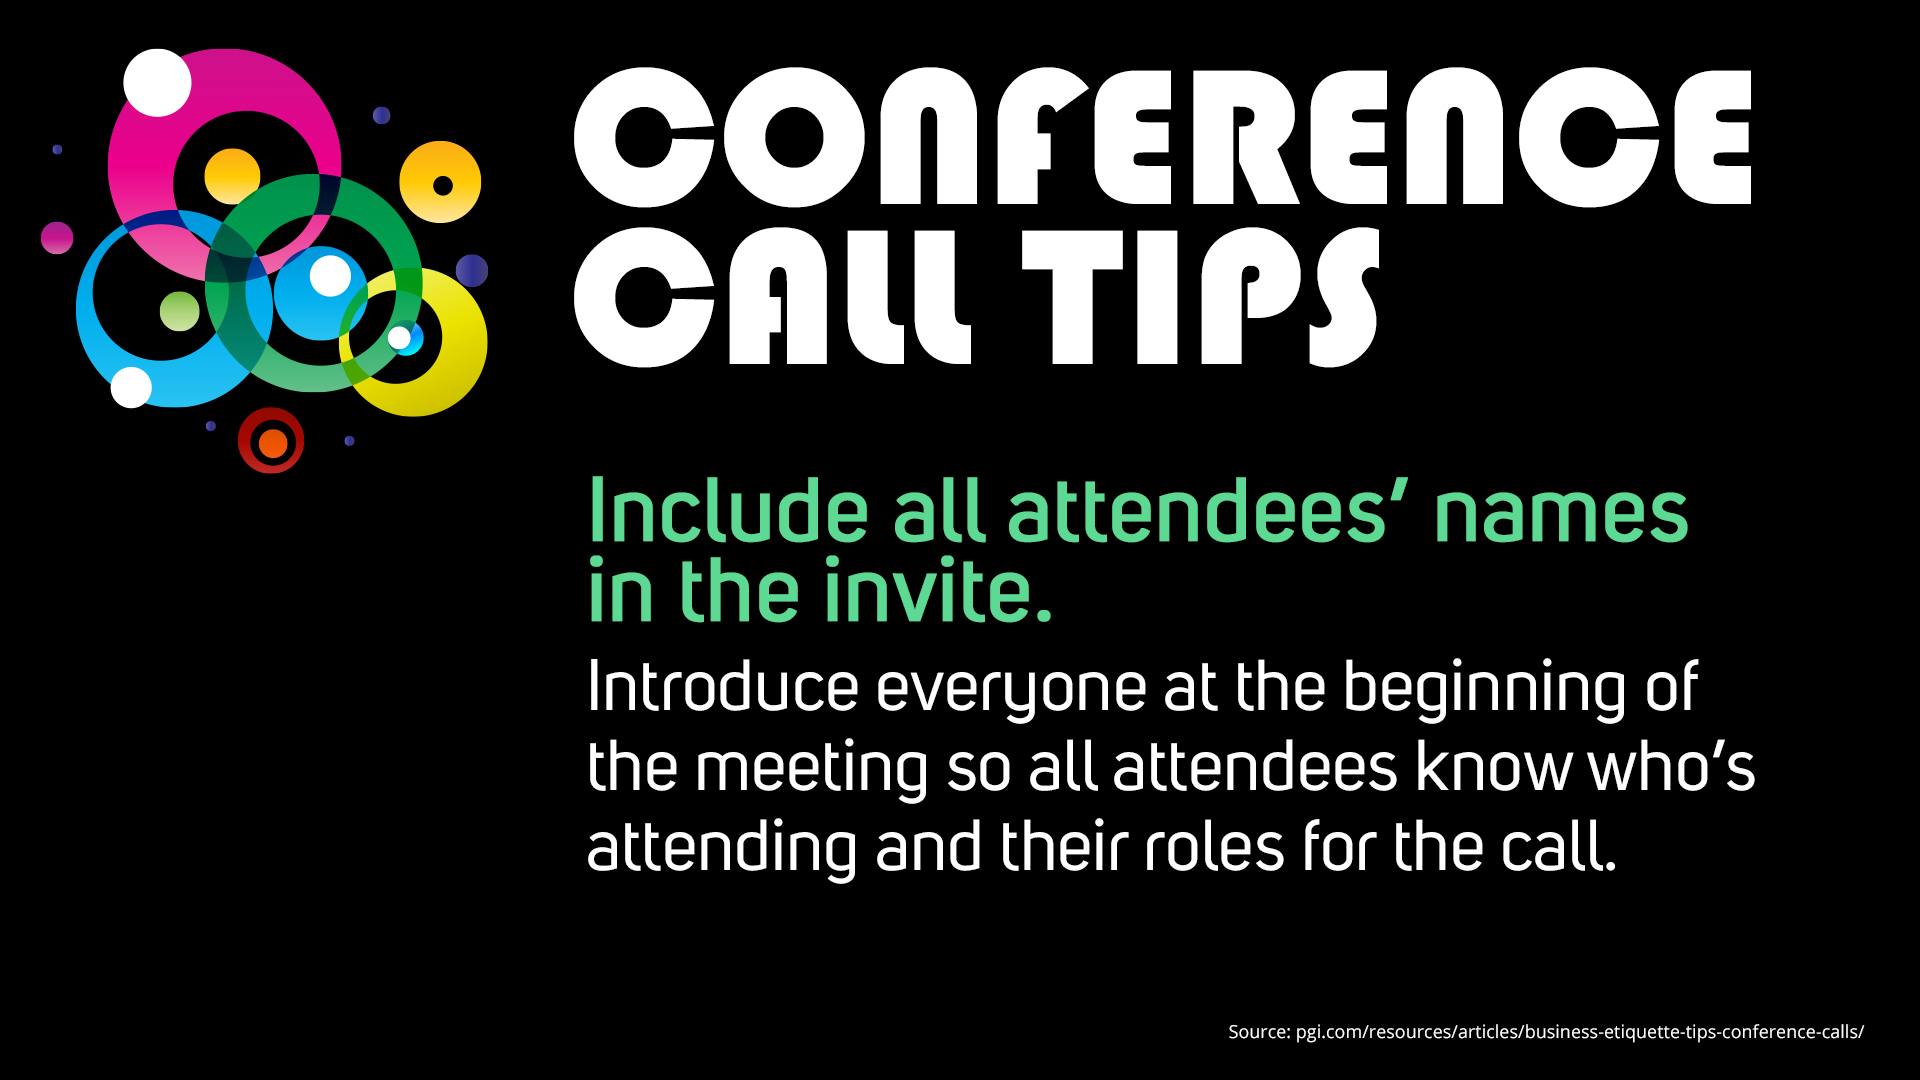 Free Graphic | Conference Call Tips | Include all attendee names in the invite